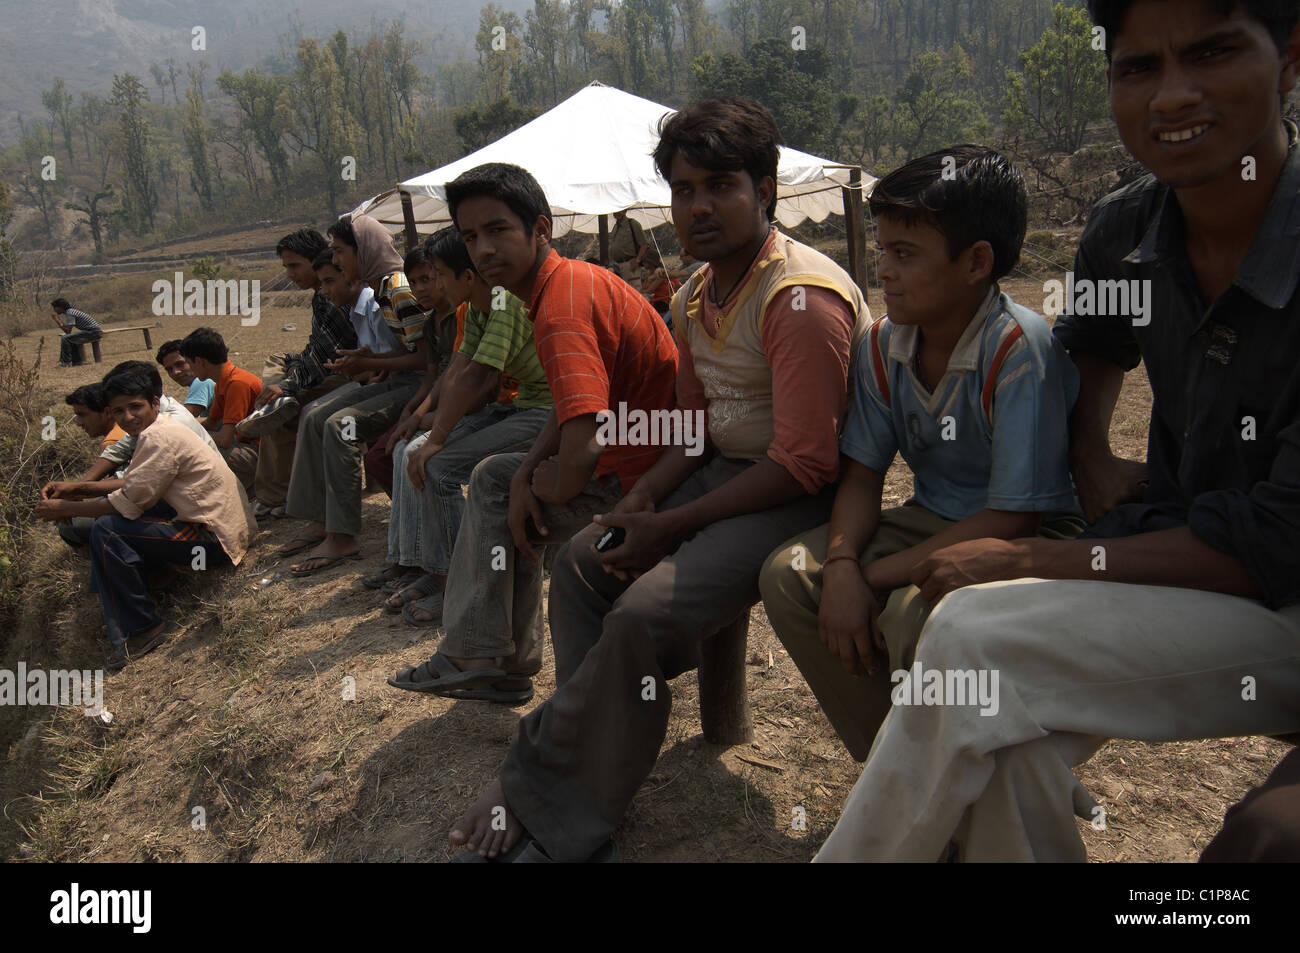 A group of men sit and watch a cricket match on a field in Jim Corbett National PArk in India. Stock Photo